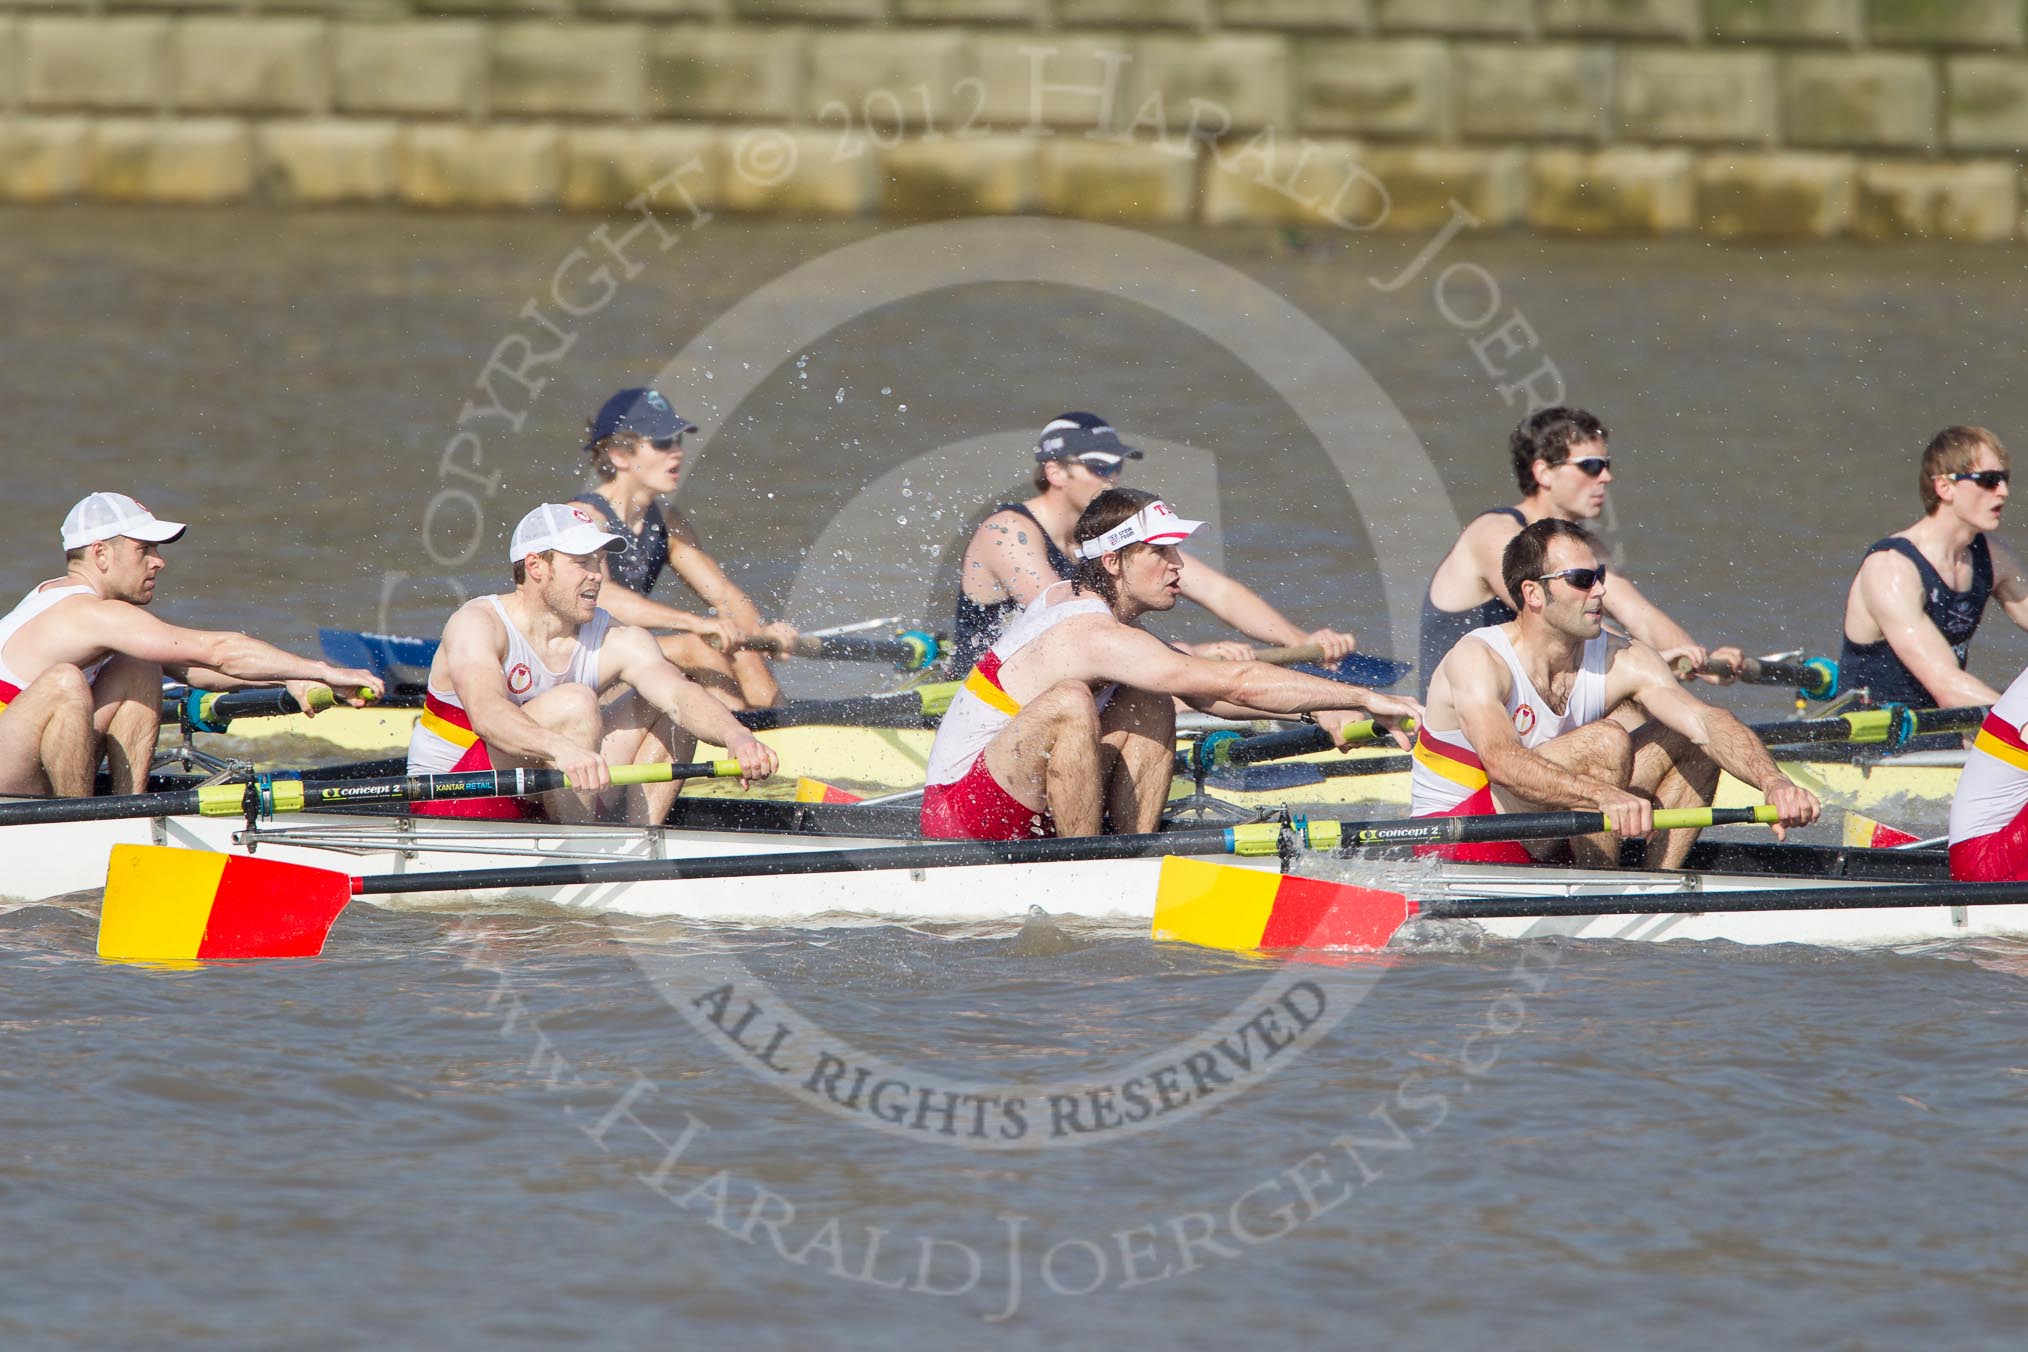 The Boat Race season 2012 - fixture OUBC vs Leander: Tideway Scullers to-be-named bow man, to-be-named 2 seat, to-be-named 3-seat, to-be-named and to-be-named, in the OUBC Isis boat bow Tom Hilton, Chris Fairweather, Julian Bubb-Humfryes, and Ben Snodin..




on 24 March 2012 at 14:01, image #74